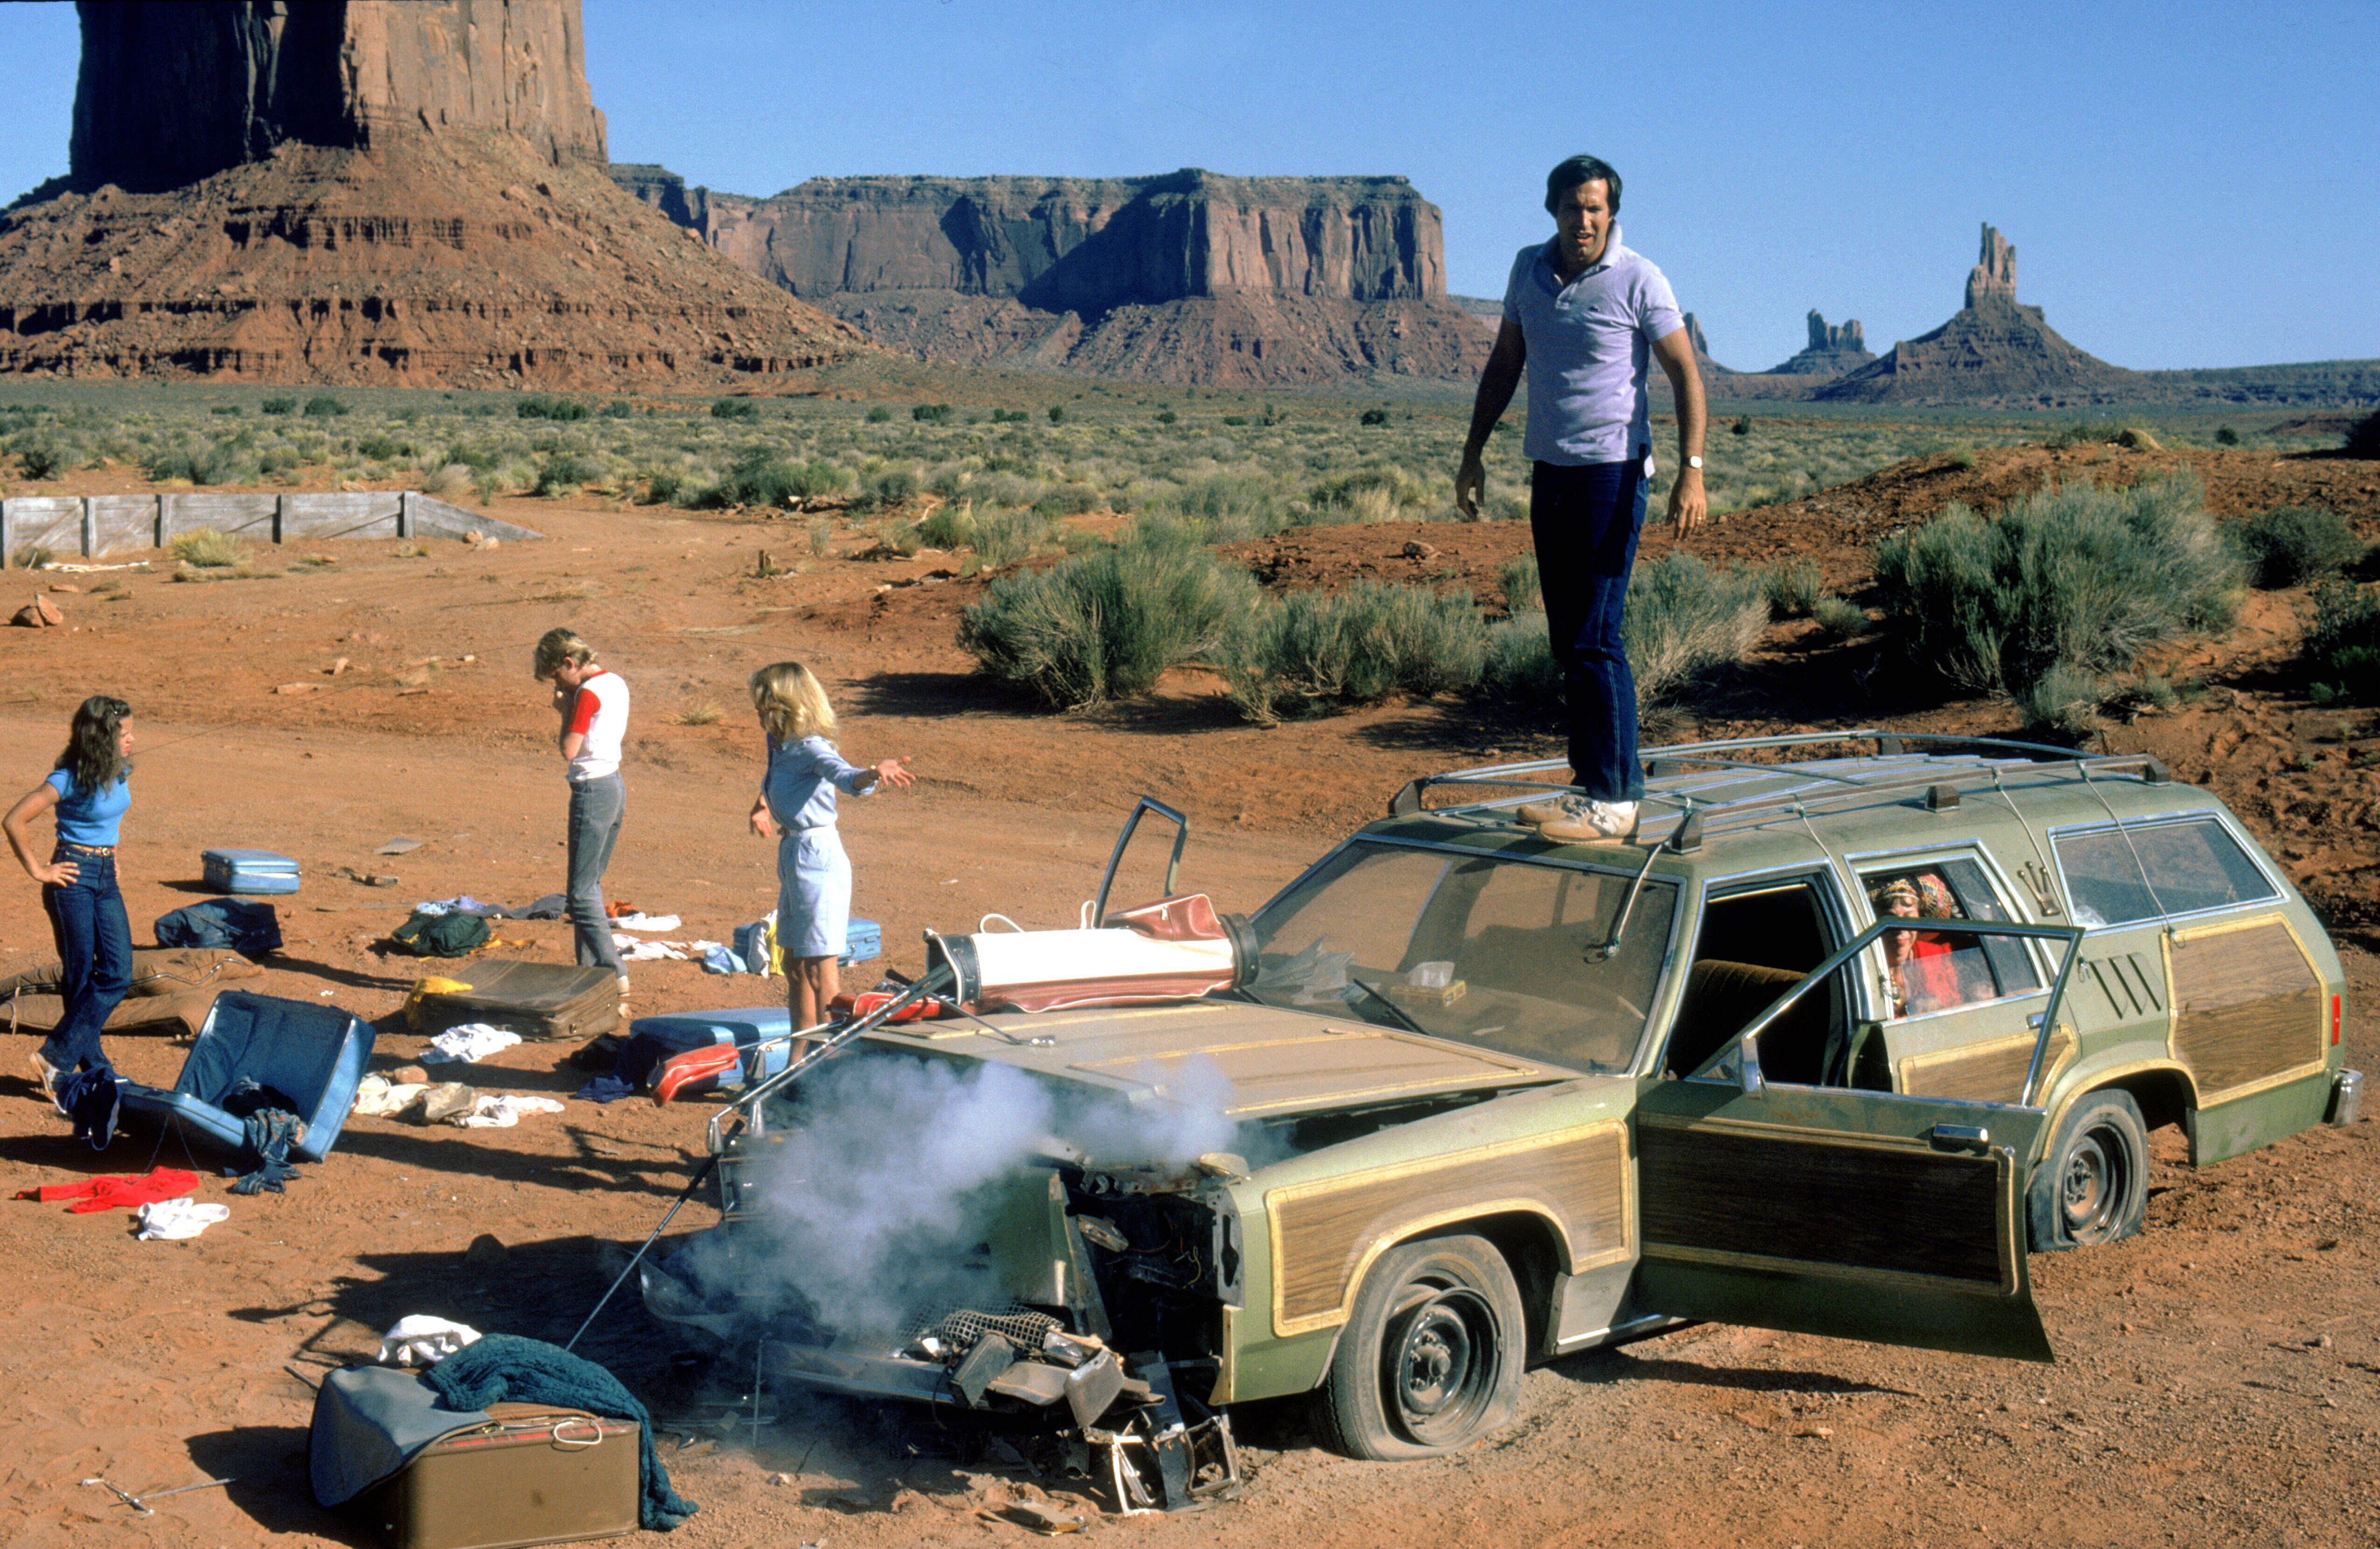 <p>While Chevy Chase is the star of the Griswold's misadventures, he wasn't always the main attraction. Instead, it's the "Wagon Queen Family Truckster" or the modified Ford LTD County Squire that played a big role in <i>National Lampoon's Vacation</i>.</p> <p>Shooting for the film allowed the cast and crew to take a road trip in real-life as they shot scenes in 15 locations across four states. There were five stations wagons made for filming, allowing for each one to be altered in the way the script had intended. The cars managed to survive vandalism, an amazing jump, and a breakdown in the desert, along with shifty mechanics.</p>